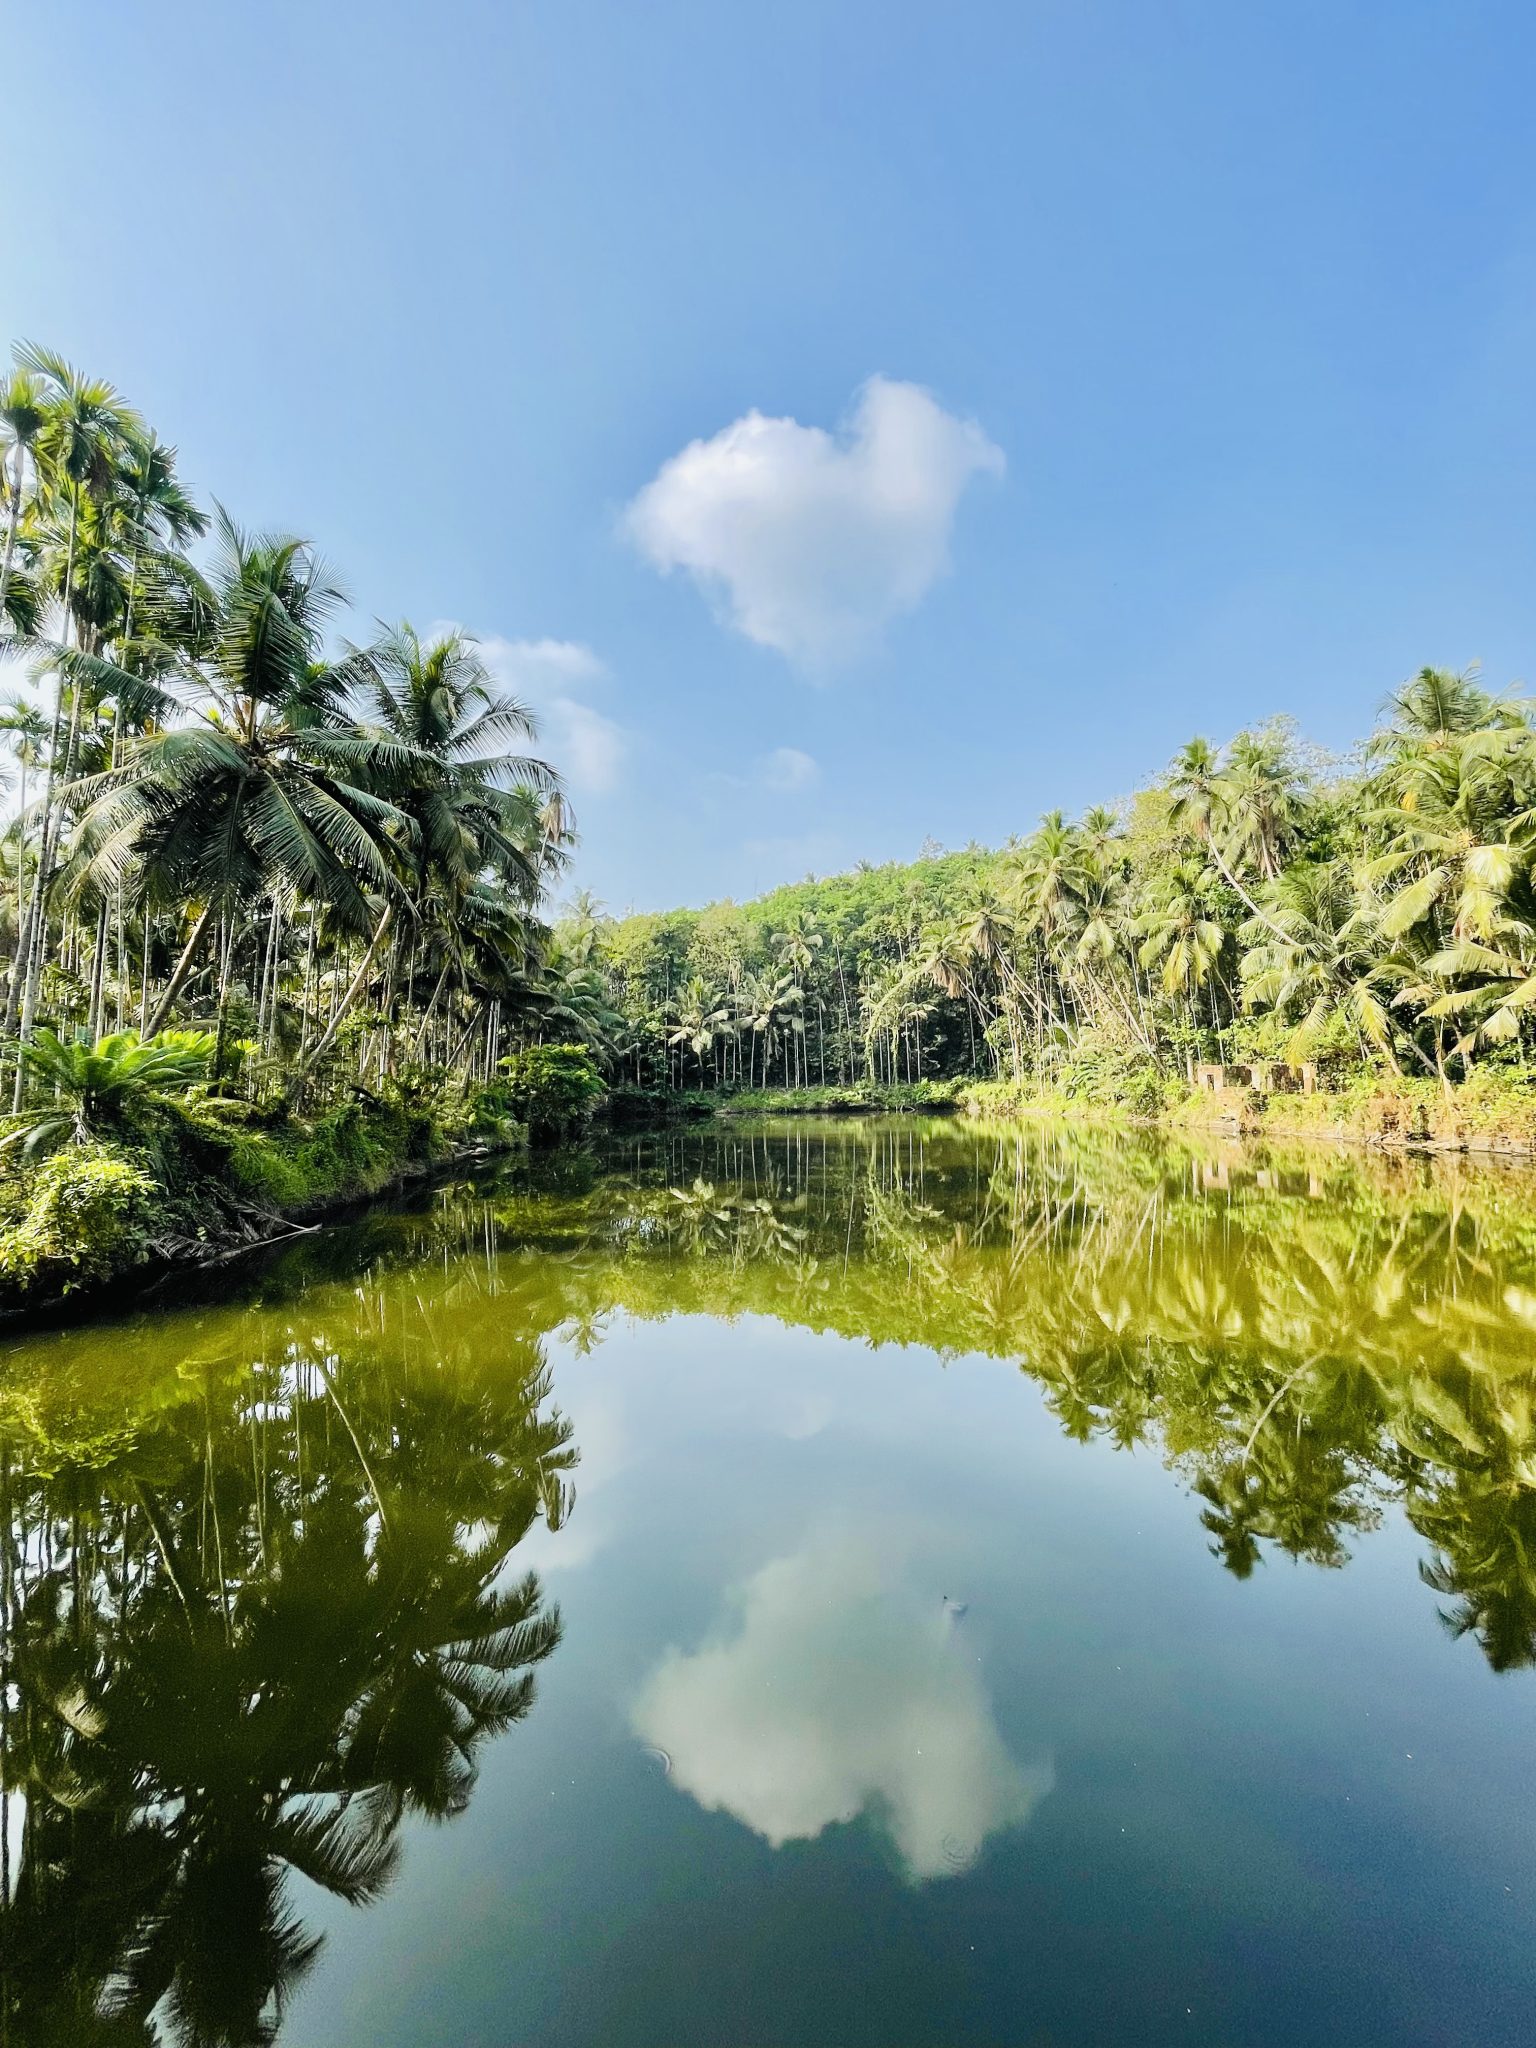 Thrikkalayoor Mahadeva Temple pond. Malappuram, Kerala, India. Clear sky, one small cloud, pond set in a palm forest. Water is greenish, but very reflective, so you can see the forest and the sky in the reflection.